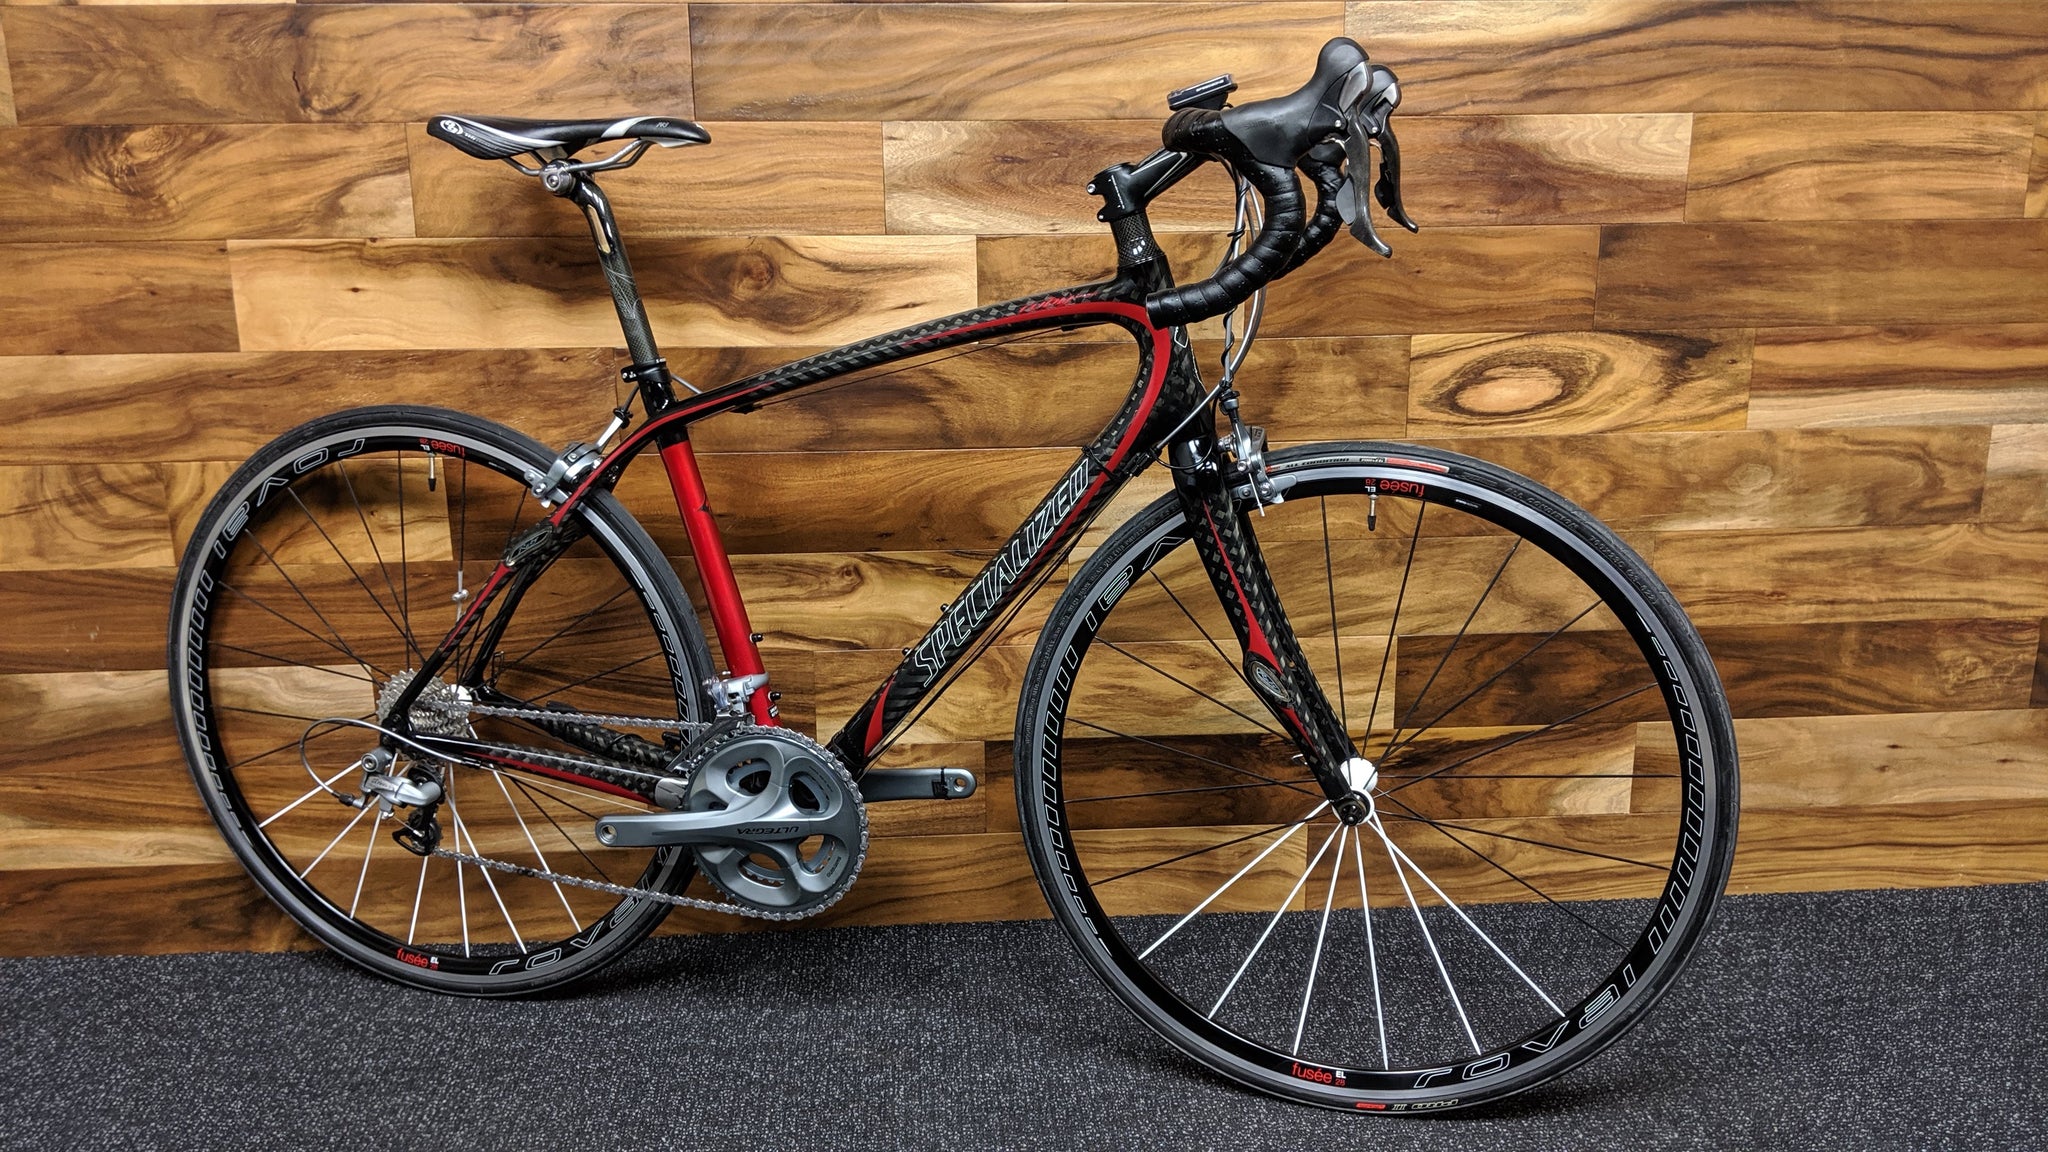 2010 SPECIALIZED RUBY EXPERT CARBON